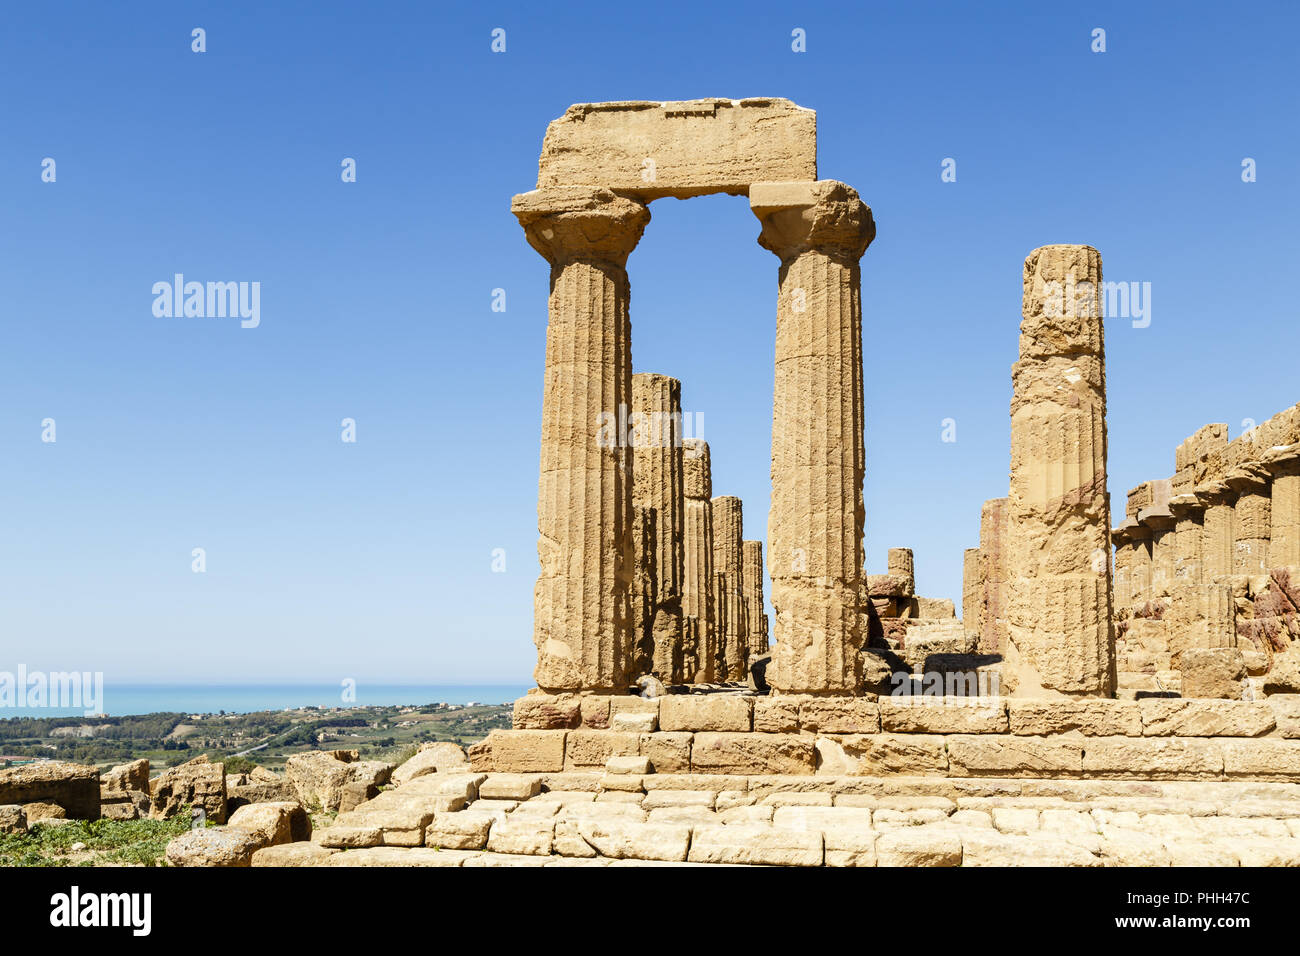 Valley of the Temples, Agrigento, Sicily, Italy Stock Photo